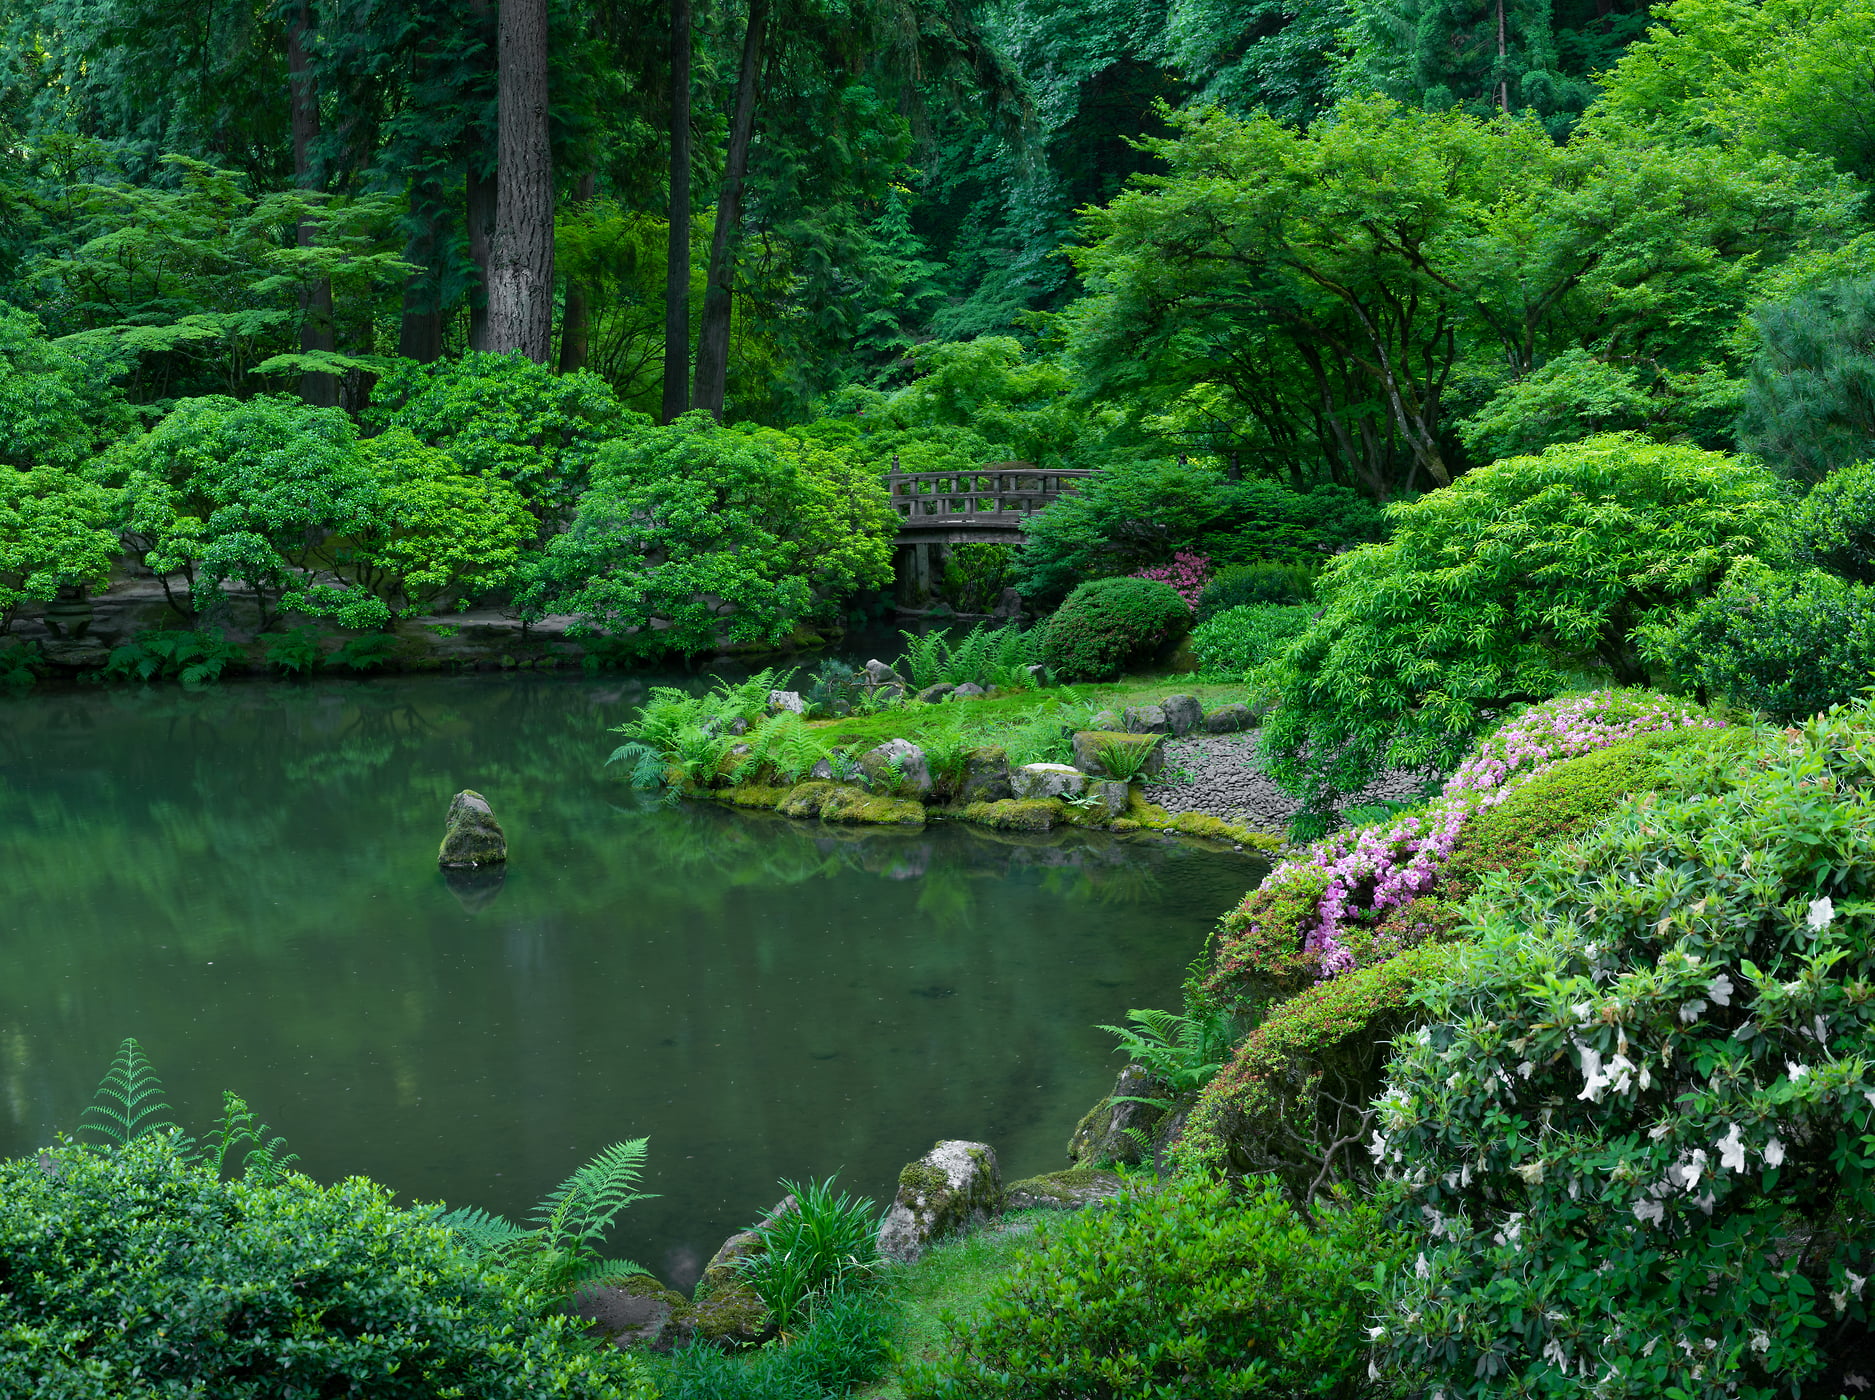 208 megapixels! A very high resolution, large-format VAST photo print of a garden pond with a bridge and forest; photograph created by Greg Probst in Portland Japanese Garden.